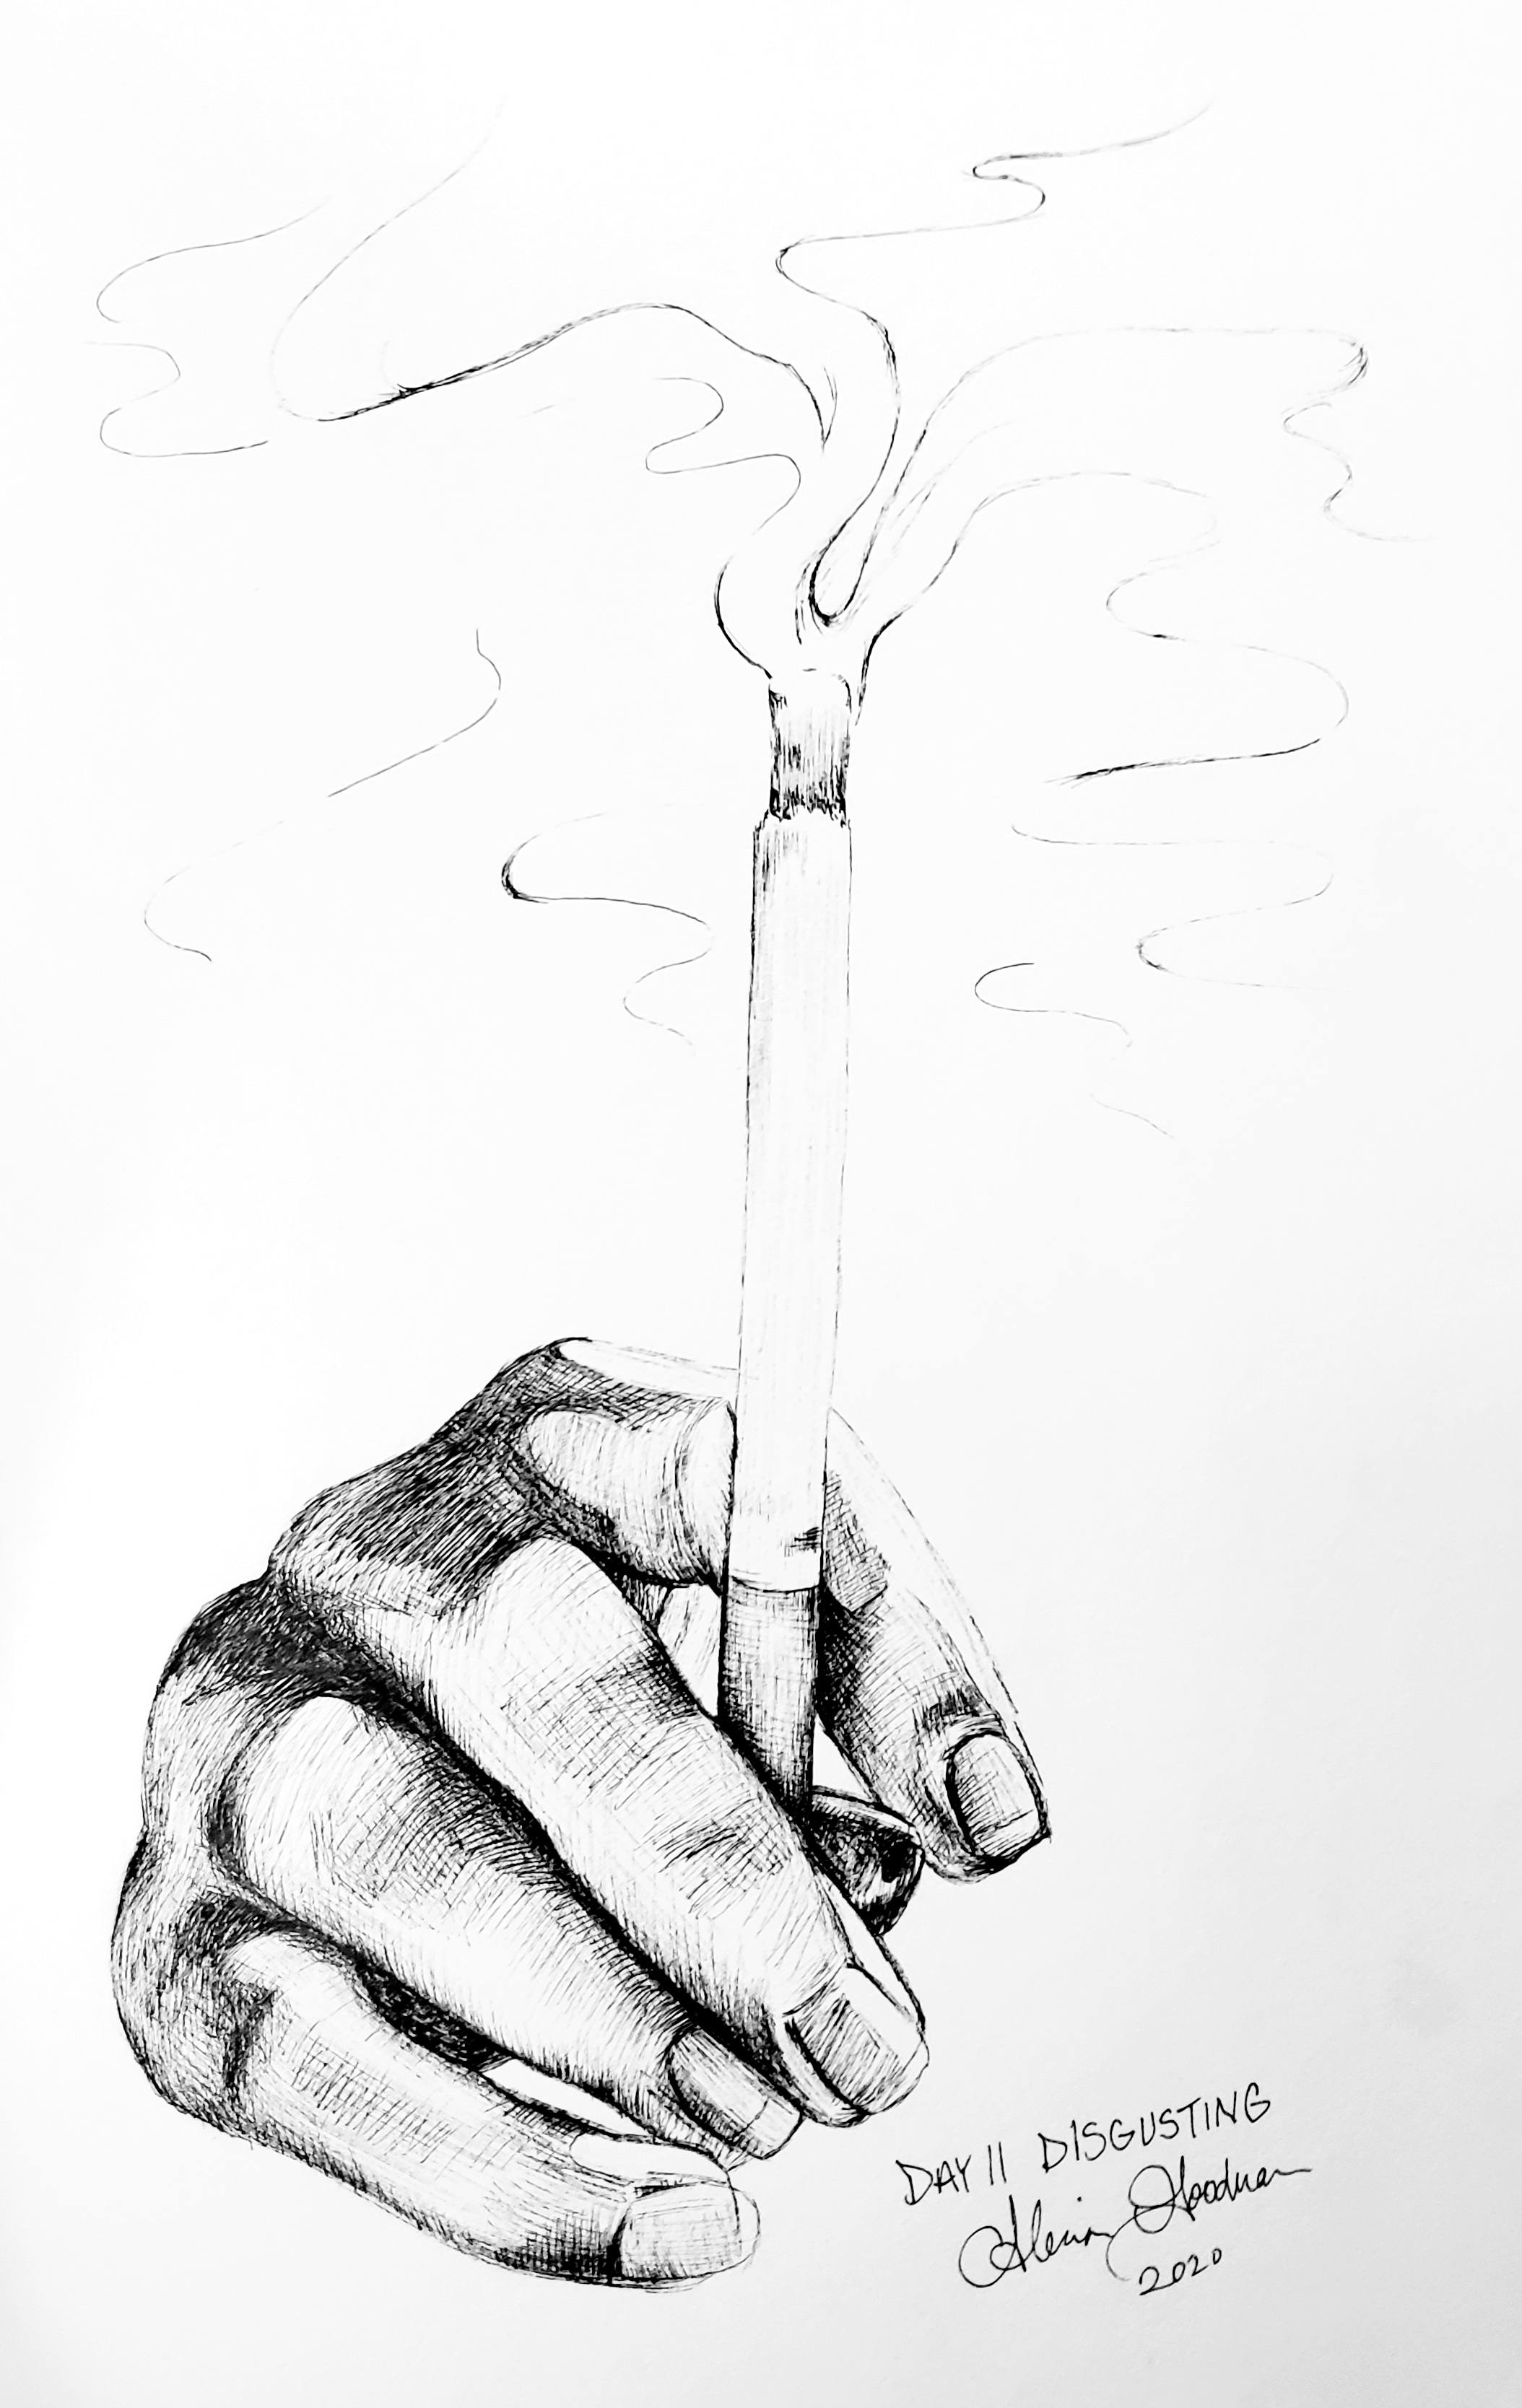 Inktober Day 11 Disgusting ink drawing of hand holding a cigarette by alecia goodman 2020 to present